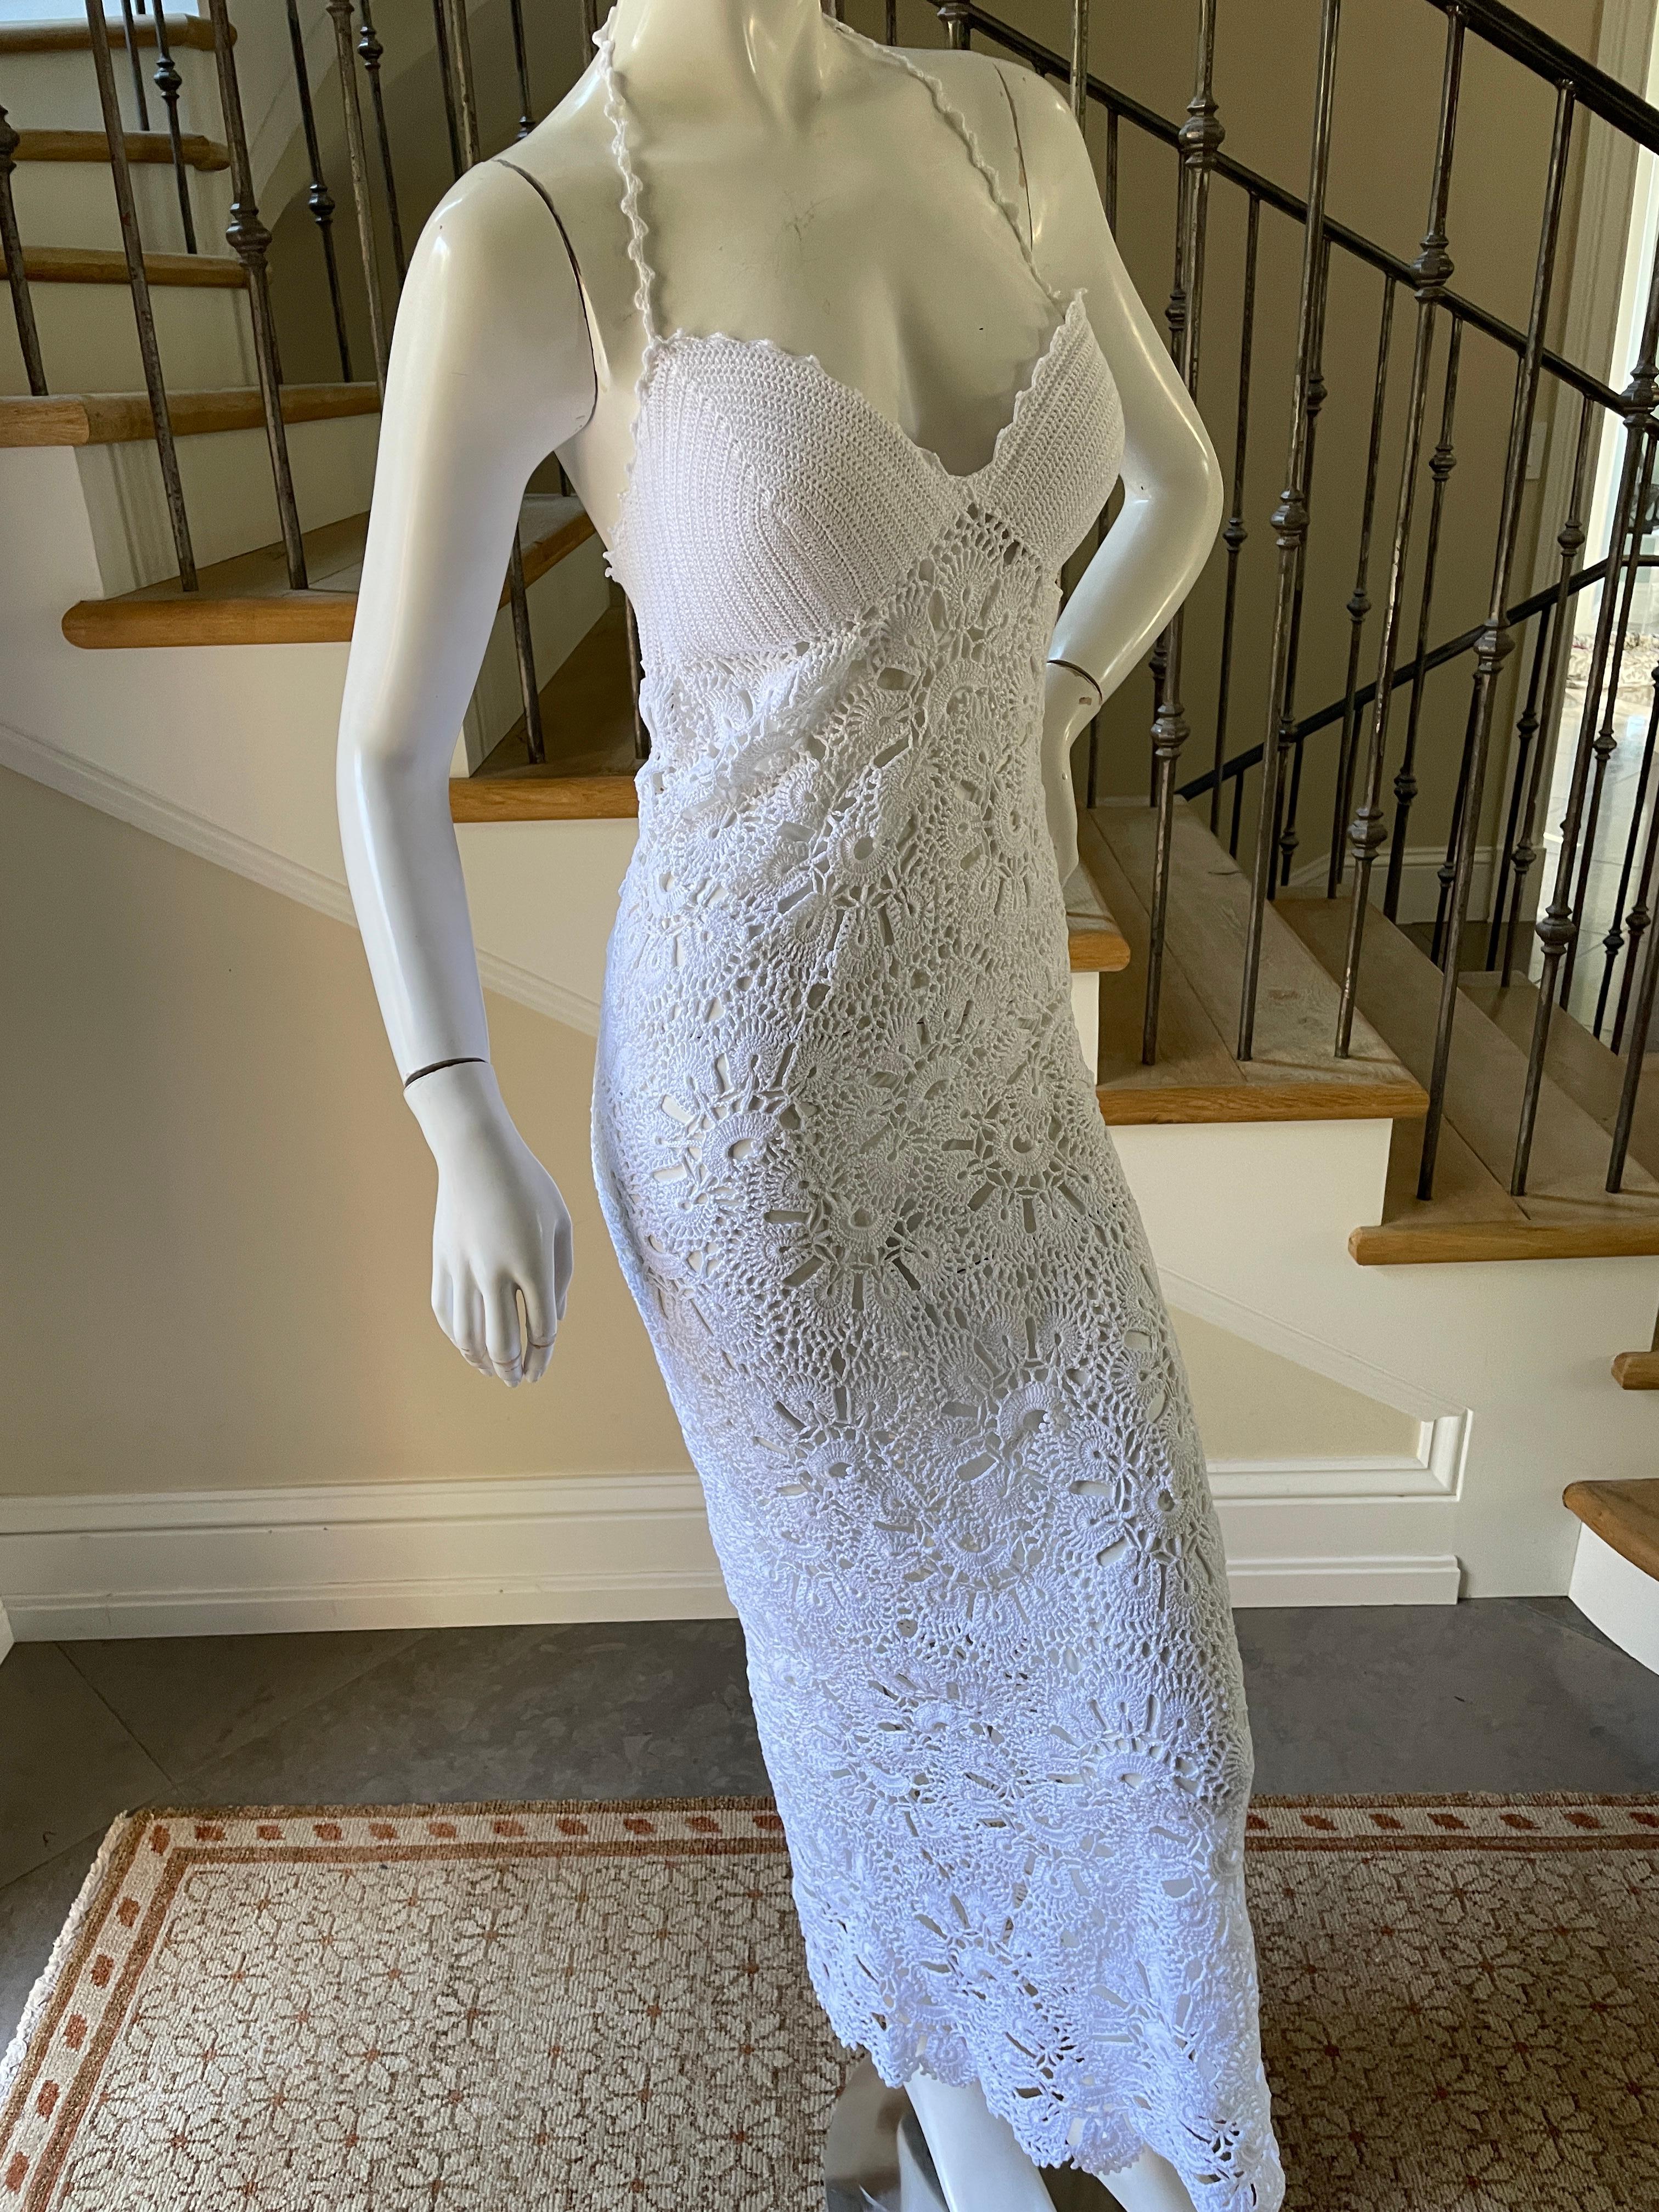 Class Cavalli Vintage Sheer White Crochet Slip Dress NWT In Excellent Condition For Sale In Cloverdale, CA